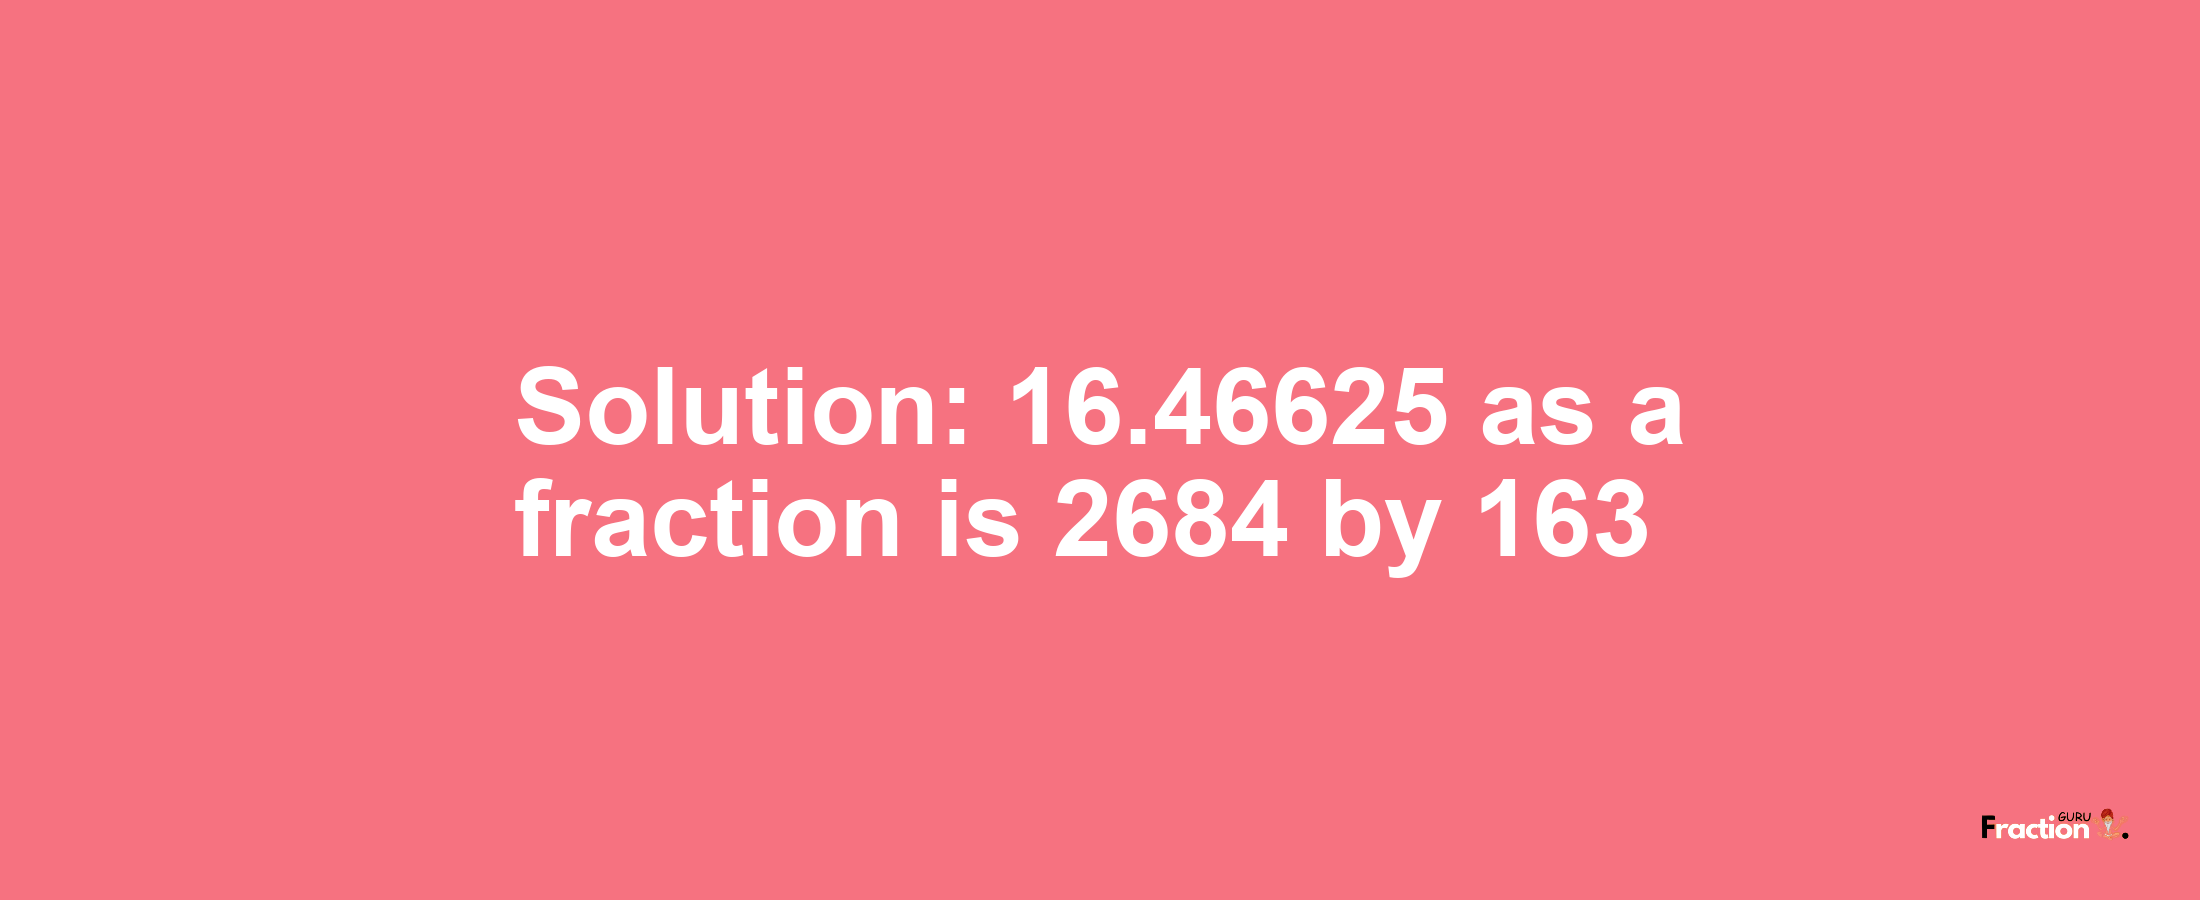 Solution:16.46625 as a fraction is 2684/163